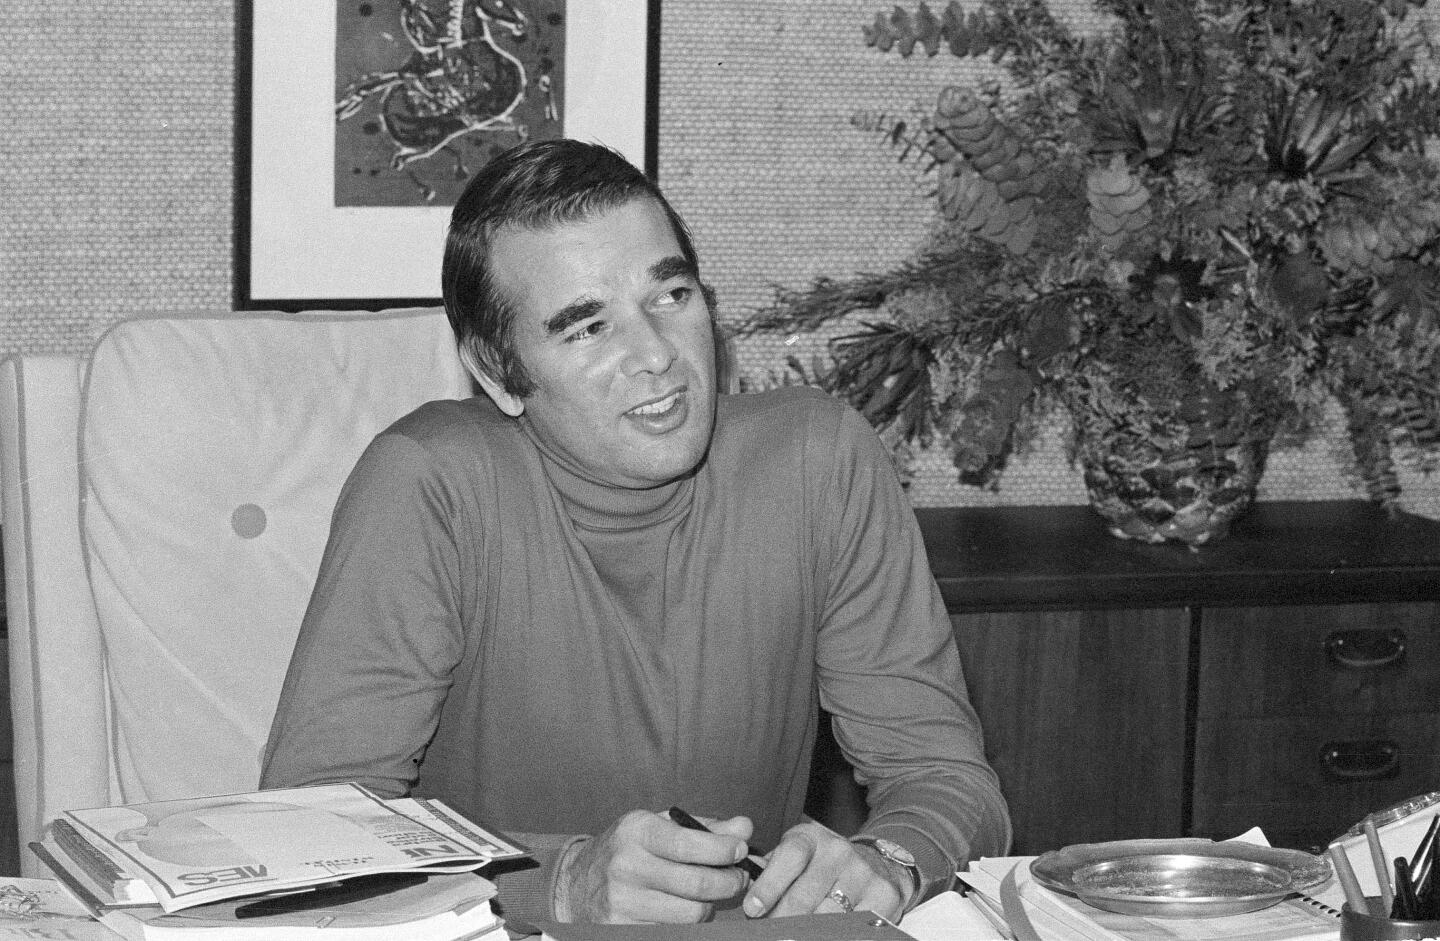 Alan Ladd Jr., an Oscar-winning producer and former studio boss who was best known for greenlighting George Lucas’ landmark blockbuster “Star Wars” in the 1970s, died at 84. Ladd was appointed president of Fox’s feature film division in 1976 and leaped at Fox’s opportunity to do "Star Wars," which became an overnight cultural phenomenon and one of the highest-grossing pictures in history. In 1979, he left Fox and formed the Ladd Co., an independent production company.